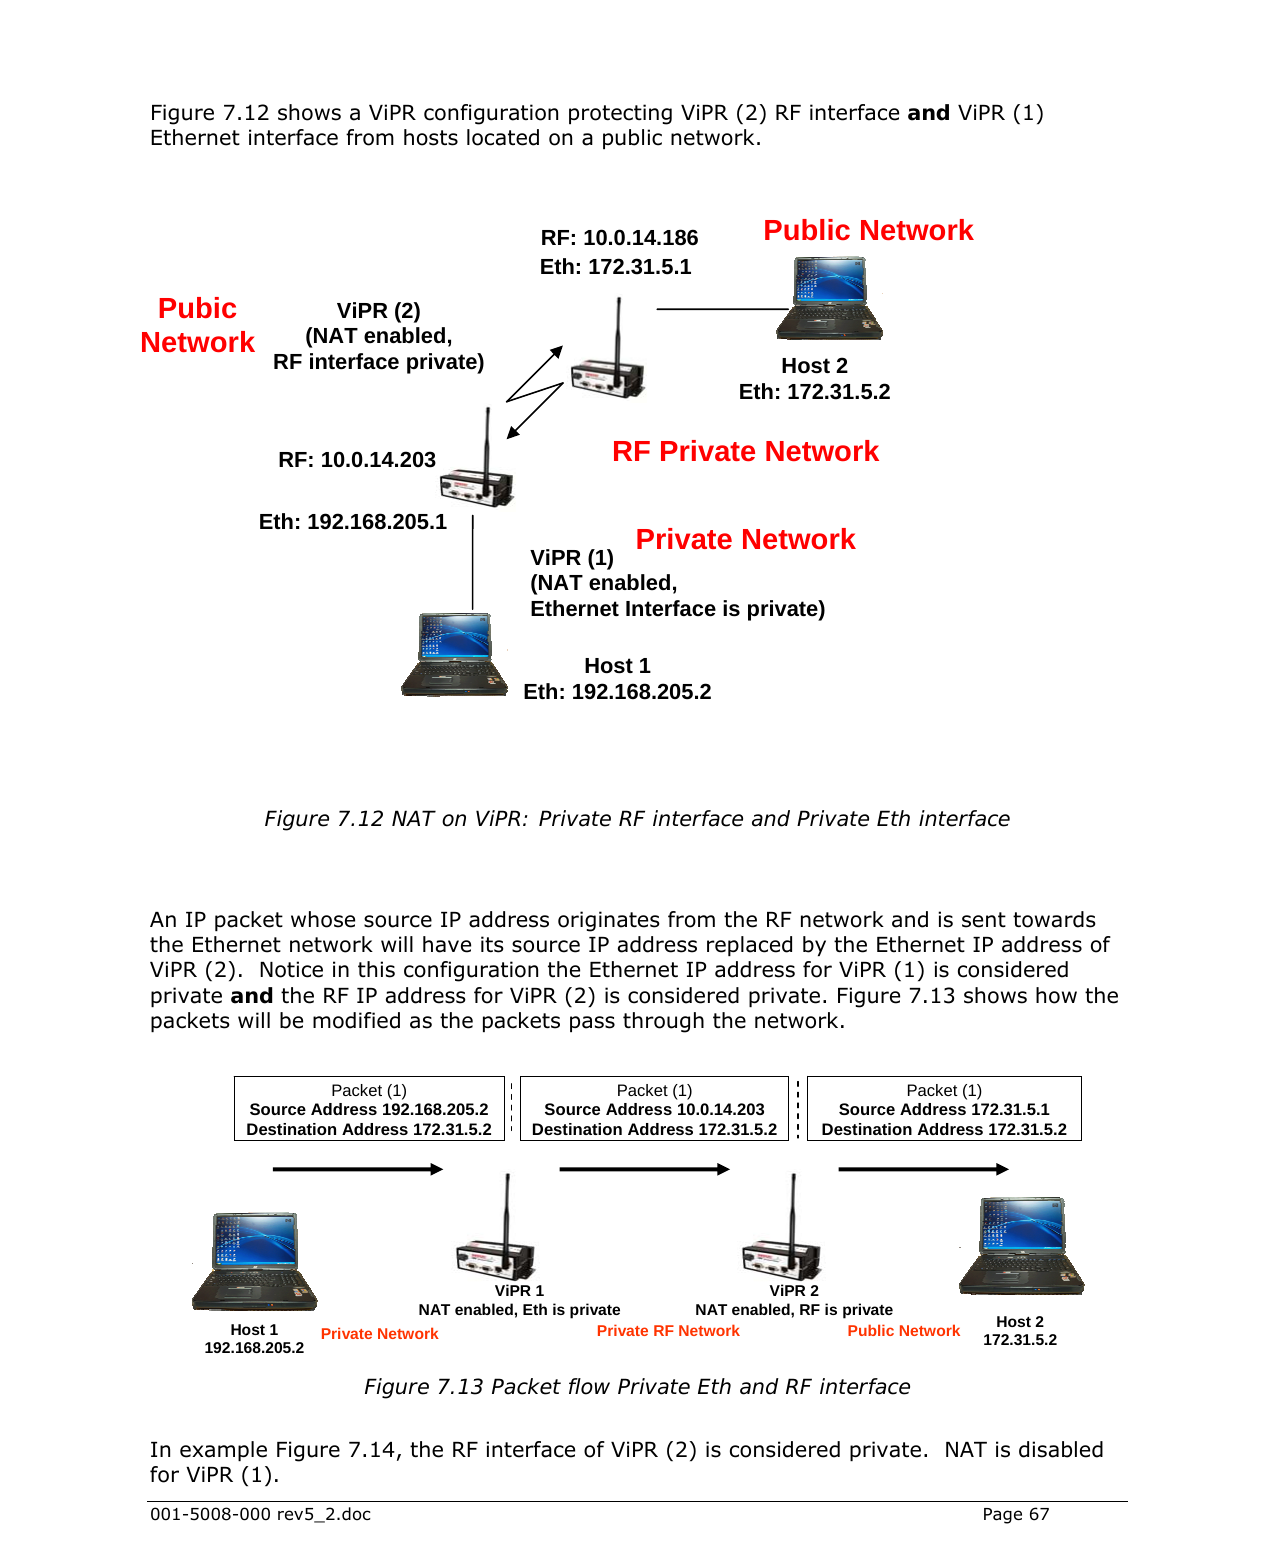  001-5008-000 rev5_2.doc    Page 67  Figure 7.12 shows a ViPR configuration protecting ViPR (2) RF interface and ViPR (1) Ethernet interface from hosts located on a public network.                  Figure 7.12 NAT on ViPR: Private RF interface and Private Eth interface   An IP packet whose source IP address originates from the RF network and is sent towards the Ethernet network will have its source IP address replaced by the Ethernet IP address of ViPR (2).  Notice in this configuration the Ethernet IP address for ViPR (1) is considered private and the RF IP address for ViPR (2) is considered private. Figure 7.13 shows how the packets will be modified as the packets pass through the network.          Figure 7.13 Packet flow Private Eth and RF interface   In example Figure 7.14, the RF interface of ViPR (2) is considered private.  NAT is disabled for ViPR (1). Eth: 172.31.5.1 RF: 10.0.14.203 RF: 10.0.14.186Eth: 192.168.205.1 Host 2 Eth: 172.31.5.2 ViPR (1) (NAT enabled,  Ethernet Interface is private) ViPR (2) (NAT enabled, RF interface private) Private NetworkHost 1 Eth: 192.168.205.2 Public Network Pubic Network RF Private NetworkPacket (1) Source Address 192.168.205.2 Destination Address 172.31.5.2 Packet (1) Source Address 10.0.14.203 Destination Address 172.31.5.2Packet (1) Source Address 172.31.5.1 Destination Address 172.31.5.2Host 1  192.168.205.2 Host 2 172.31.5.2 ViPR 1NAT enabled, Eth is private ViPR 2 NAT enabled, RF is private Private Network  Private RF Network  Public Network 